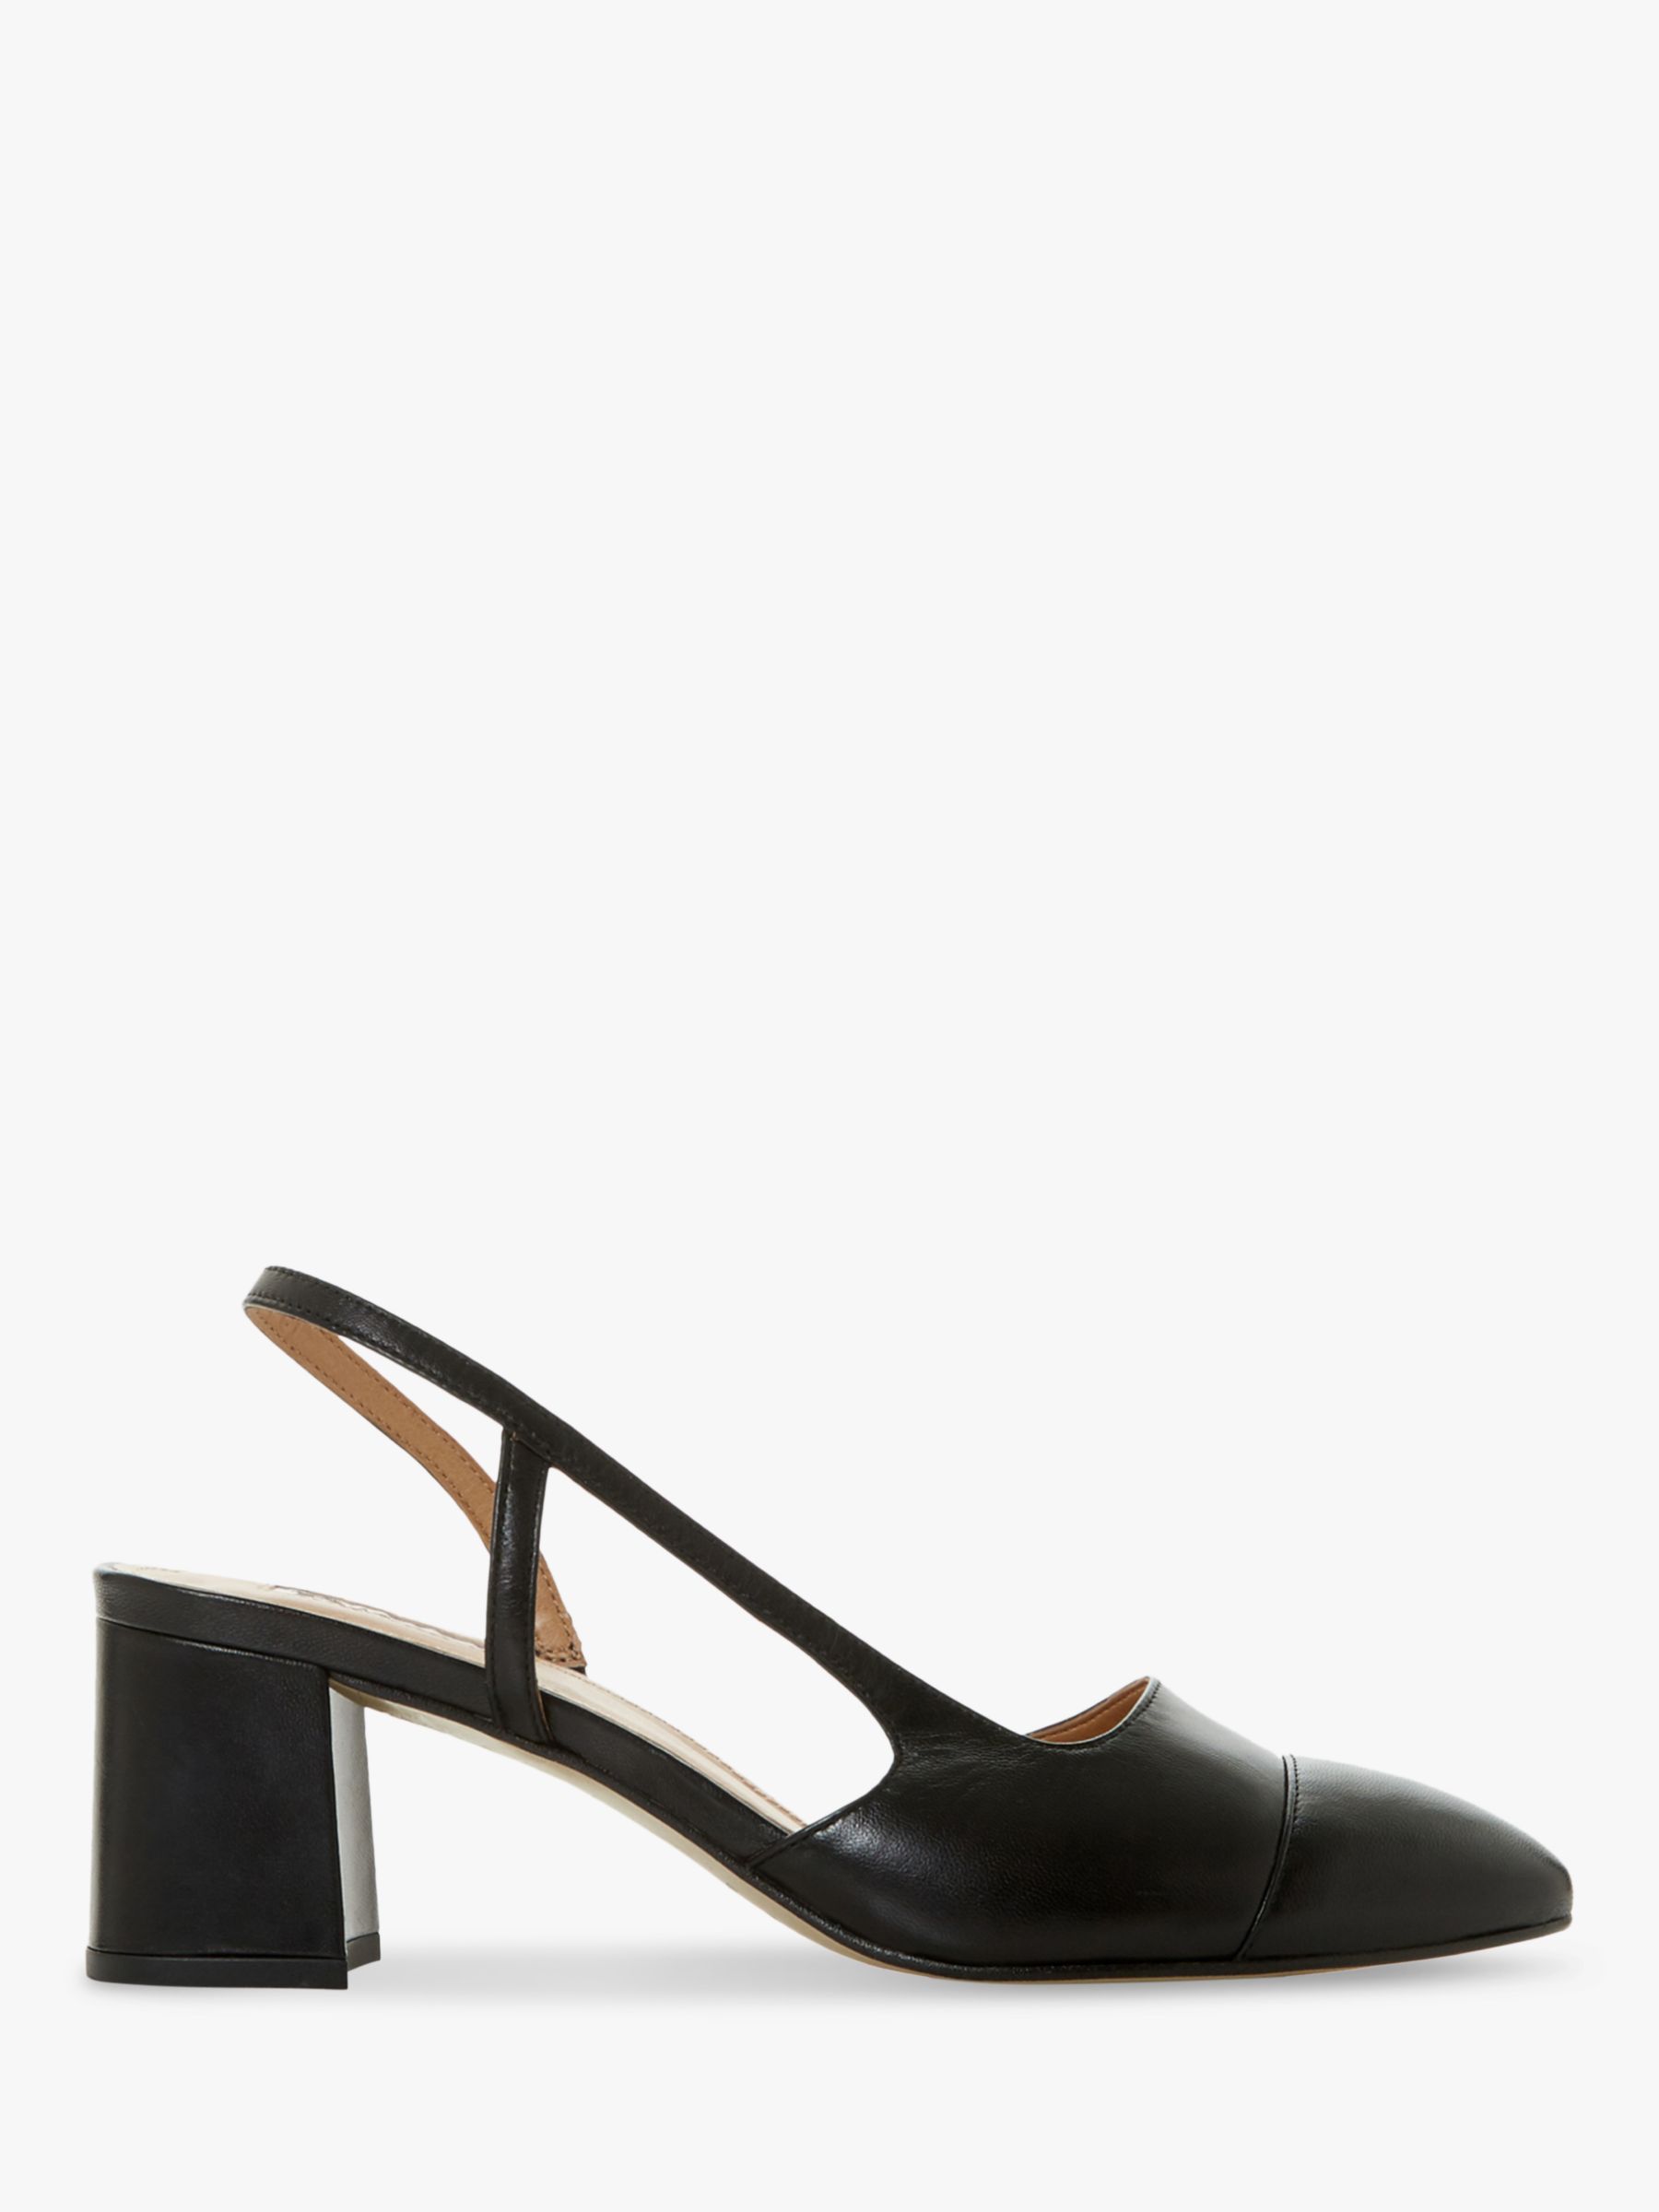 Dune Croft Leather Pointed Toe Court Shoes, Black at John Lewis & Partners